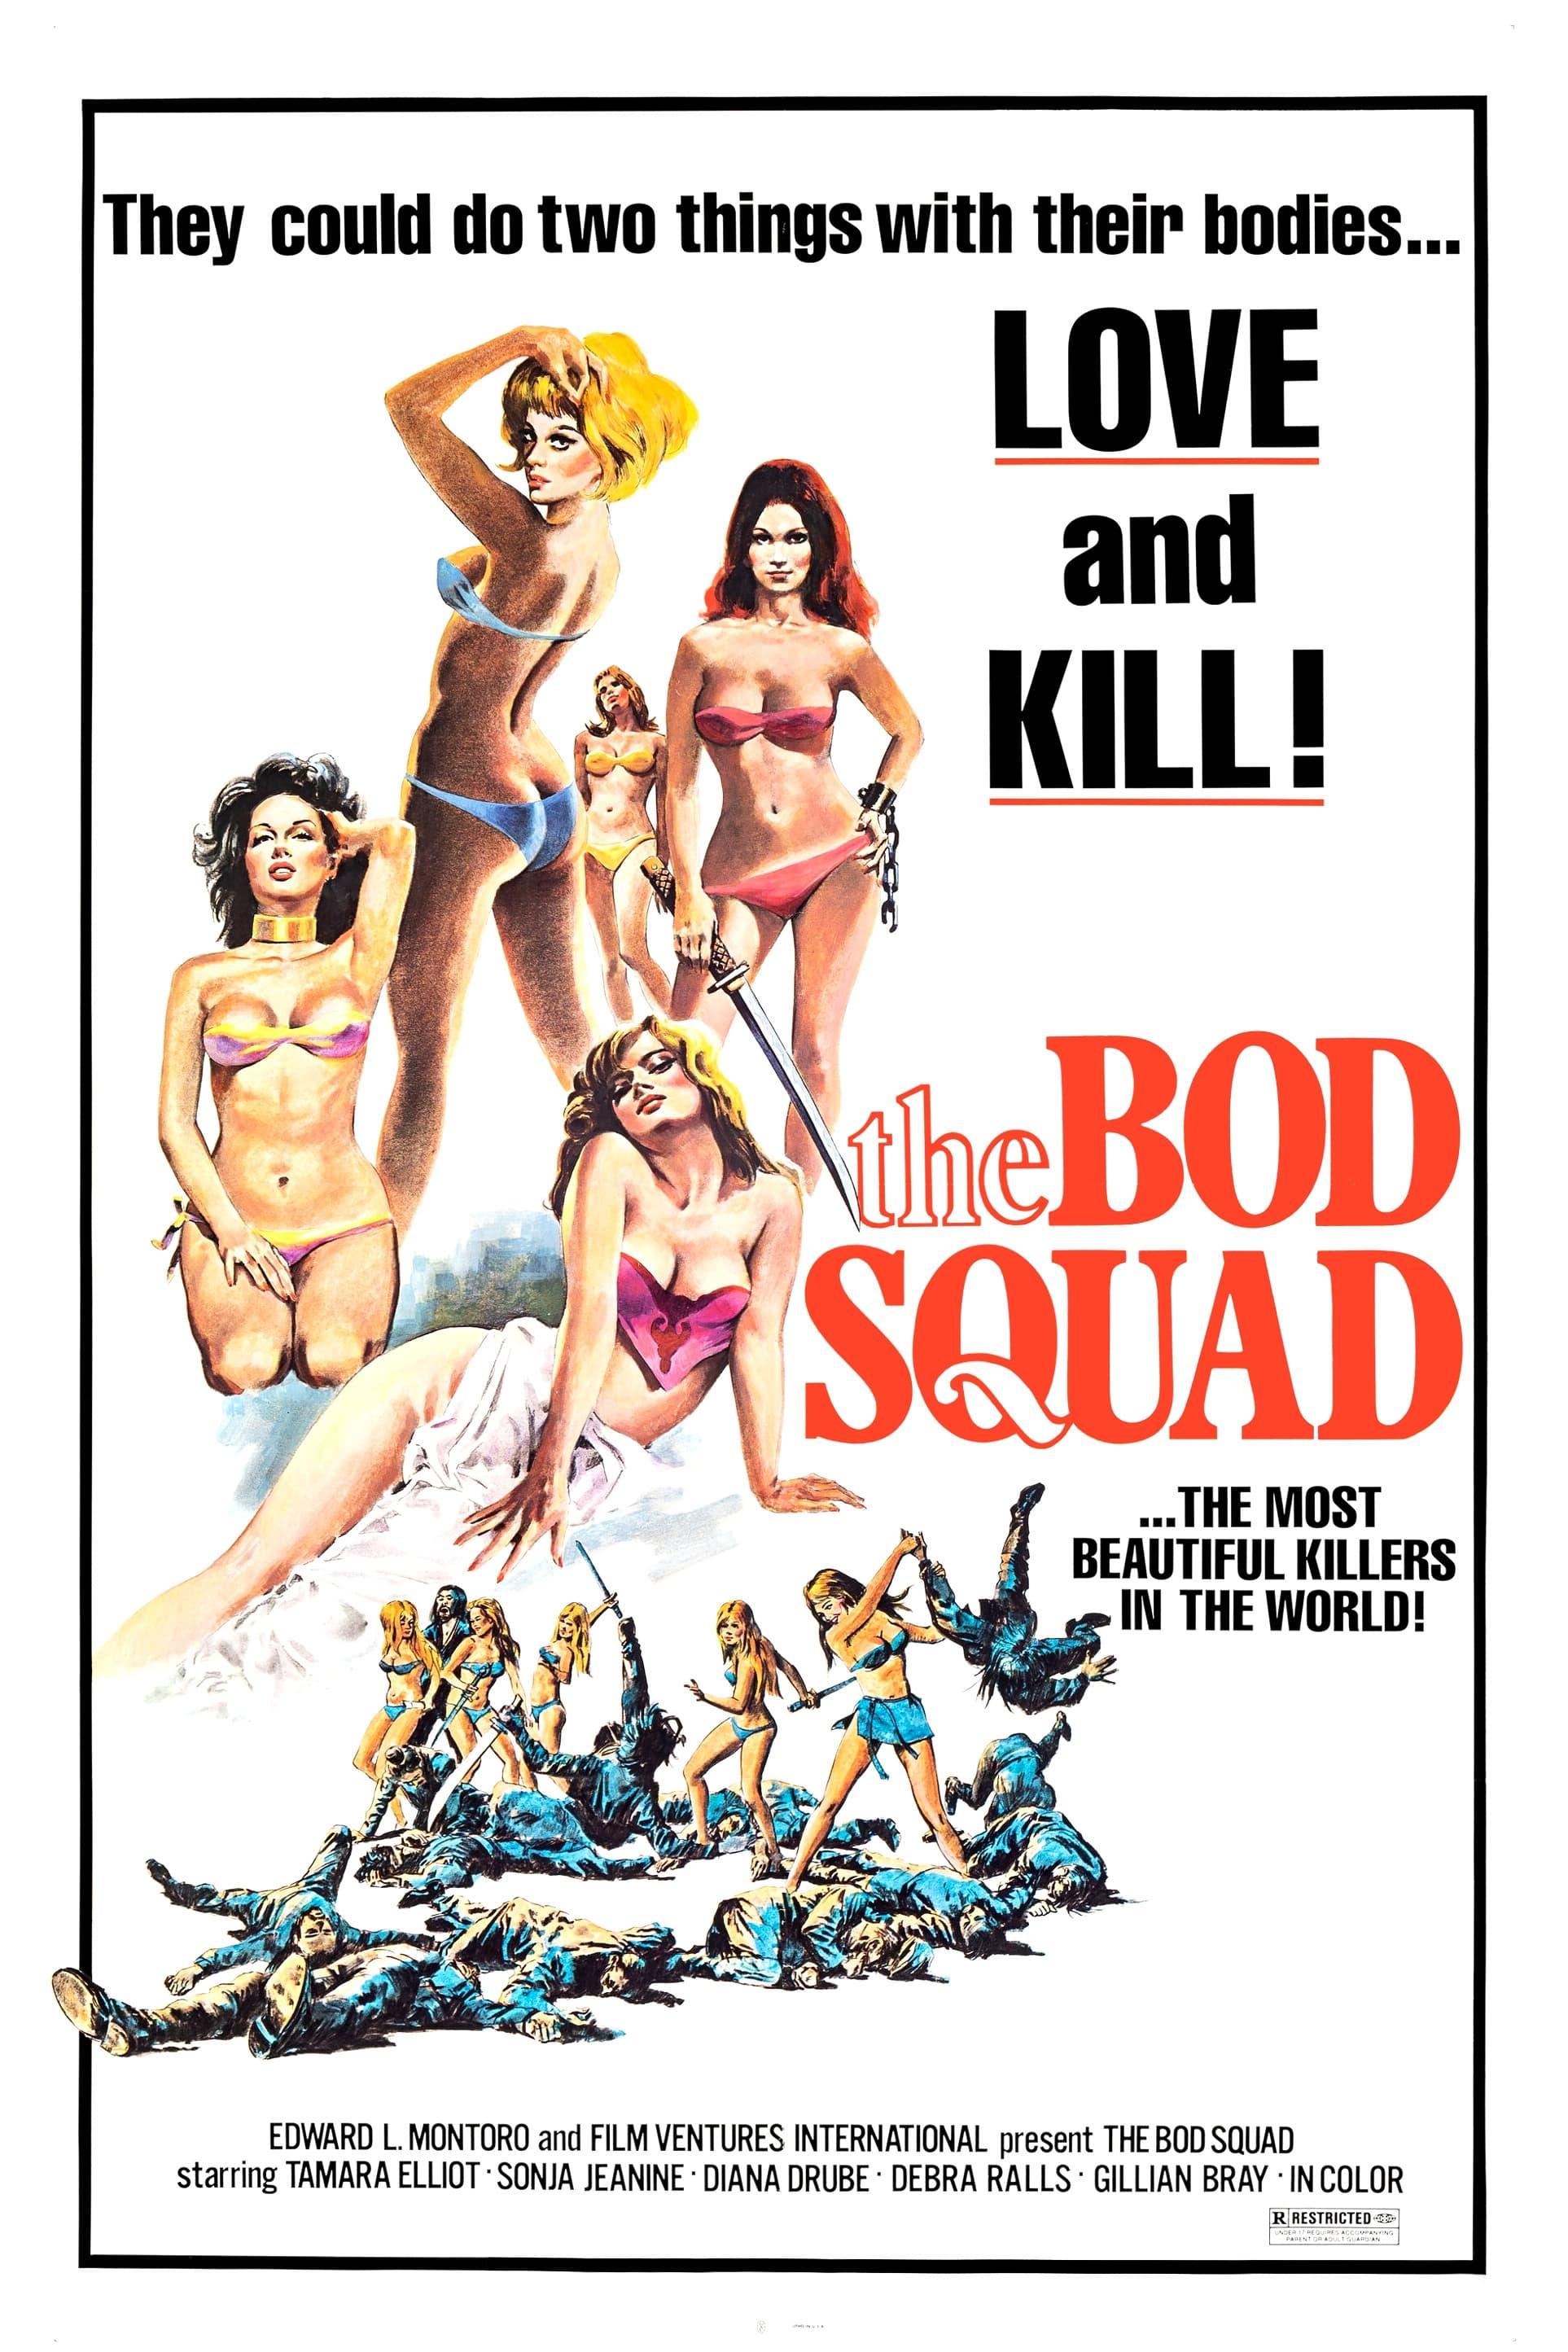 The Bod Squad poster